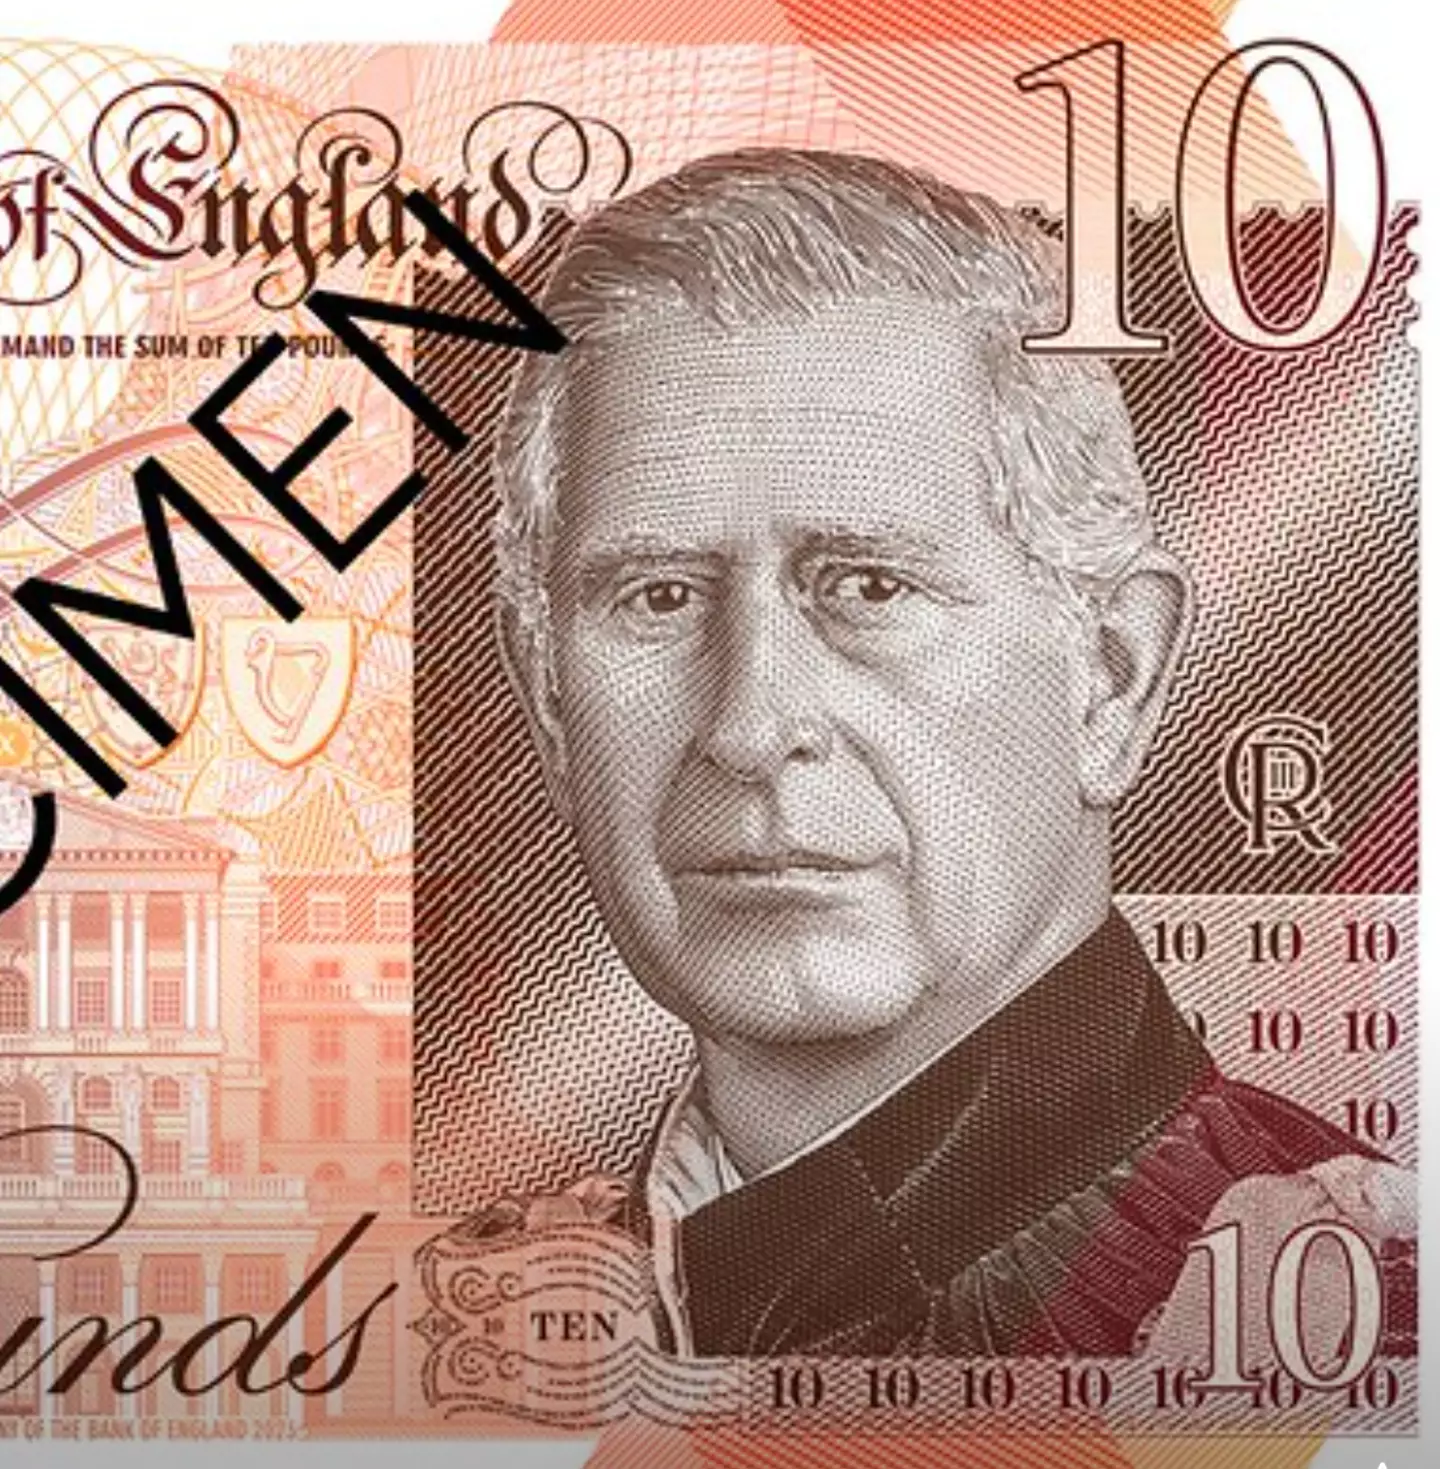 The bank notes are set to enter circulation in 2023.